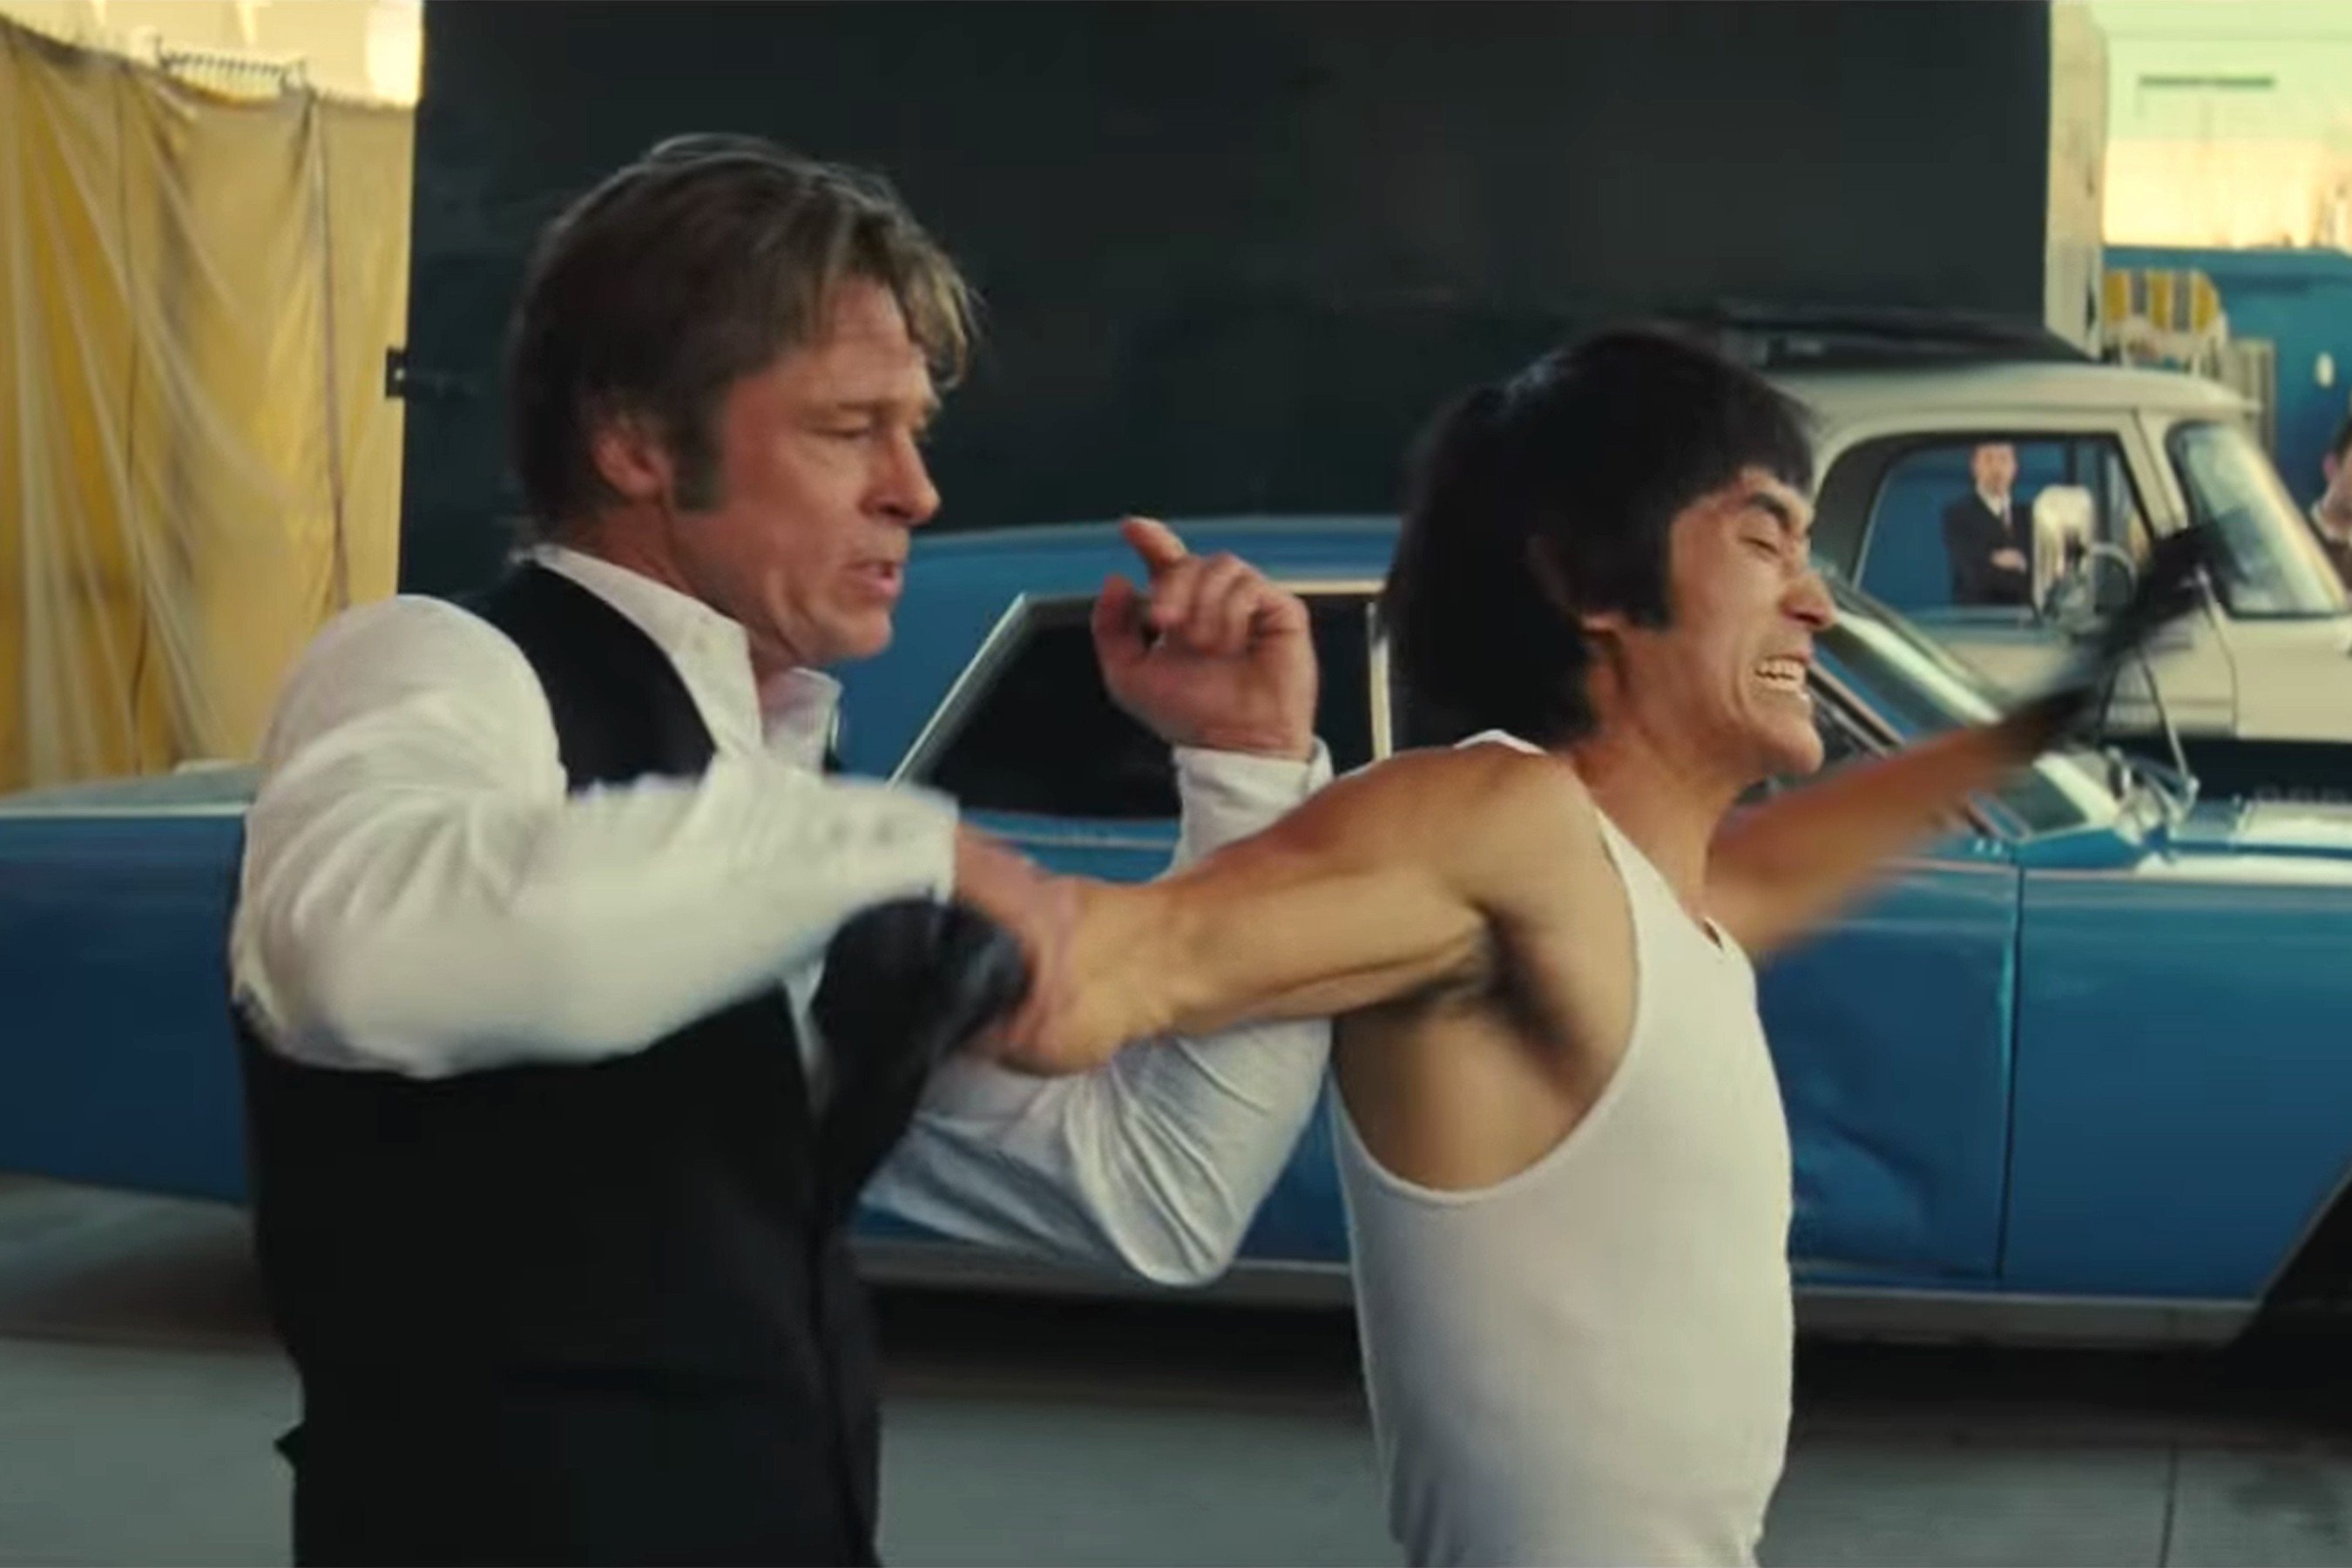 Brad Pitt’s Cliff Booth takes on Mike Moh’s Bruce Lee in Quentin Tarantino’s ‘Once Upon a Time in Hollywood’. Photo: Sony Pictures Entertainment